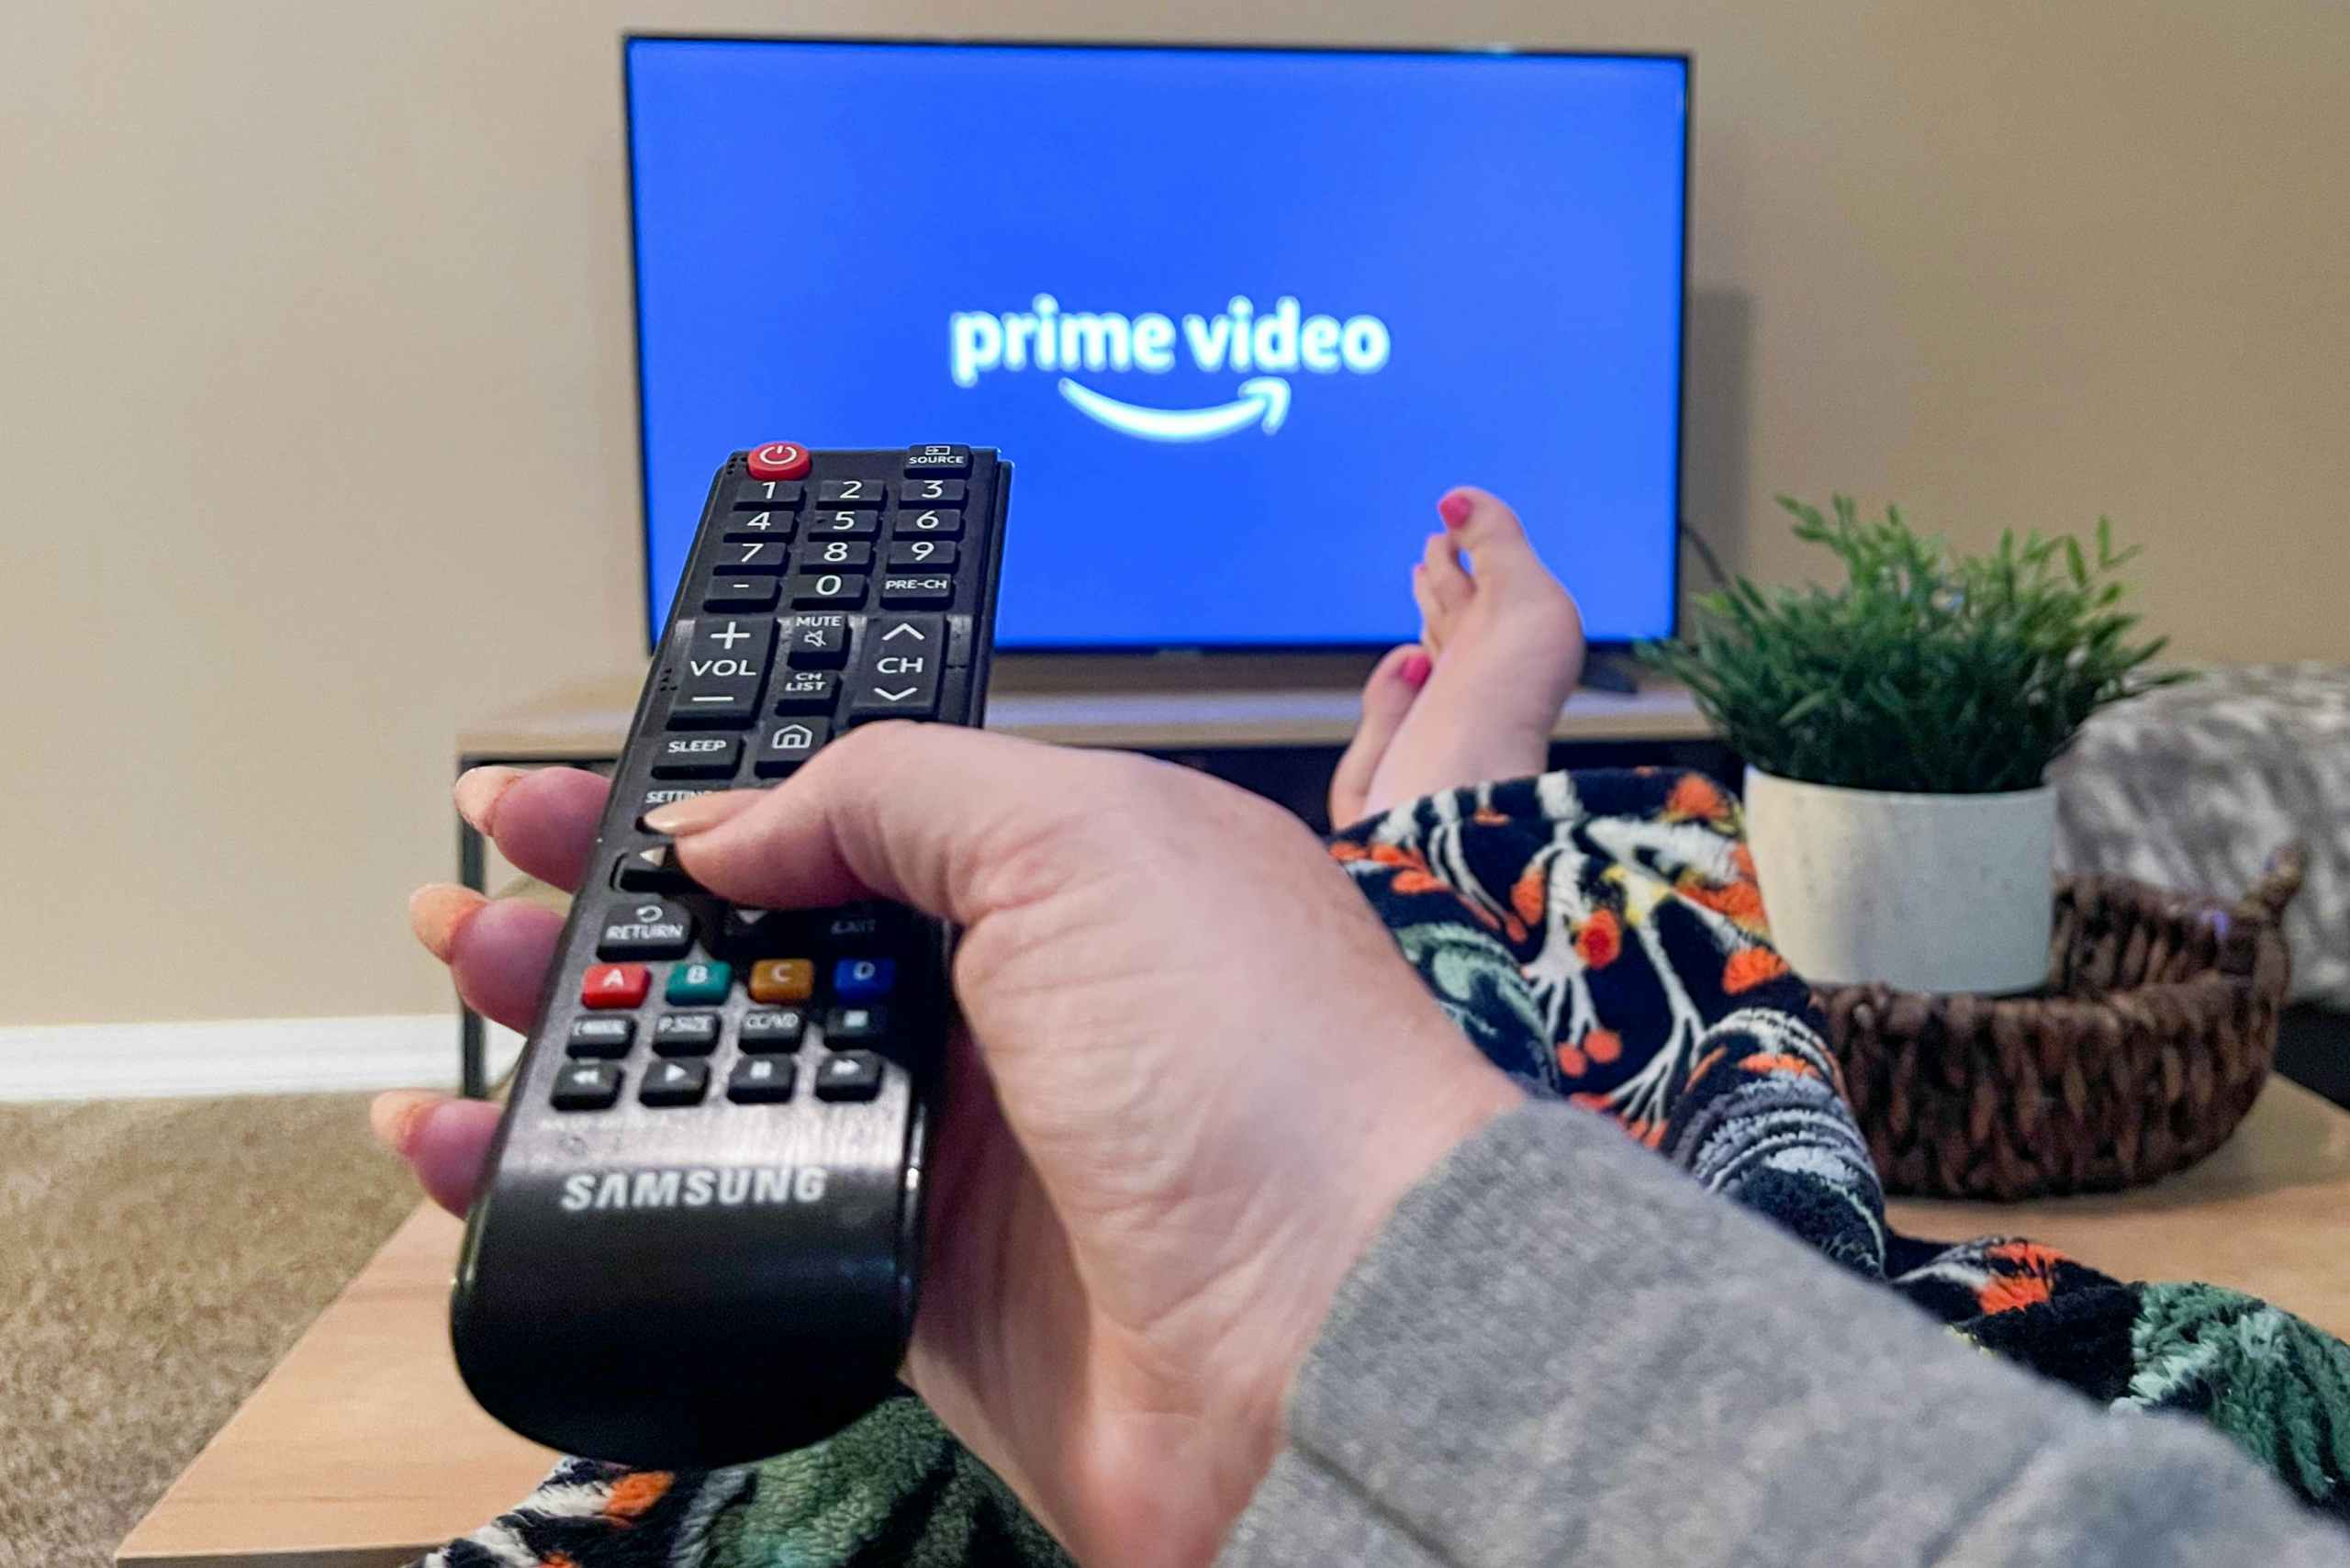 A person sitting on a couch with their feet up, pointing a remote at a TV with the Prime Video TV app's start-up screen displayed.